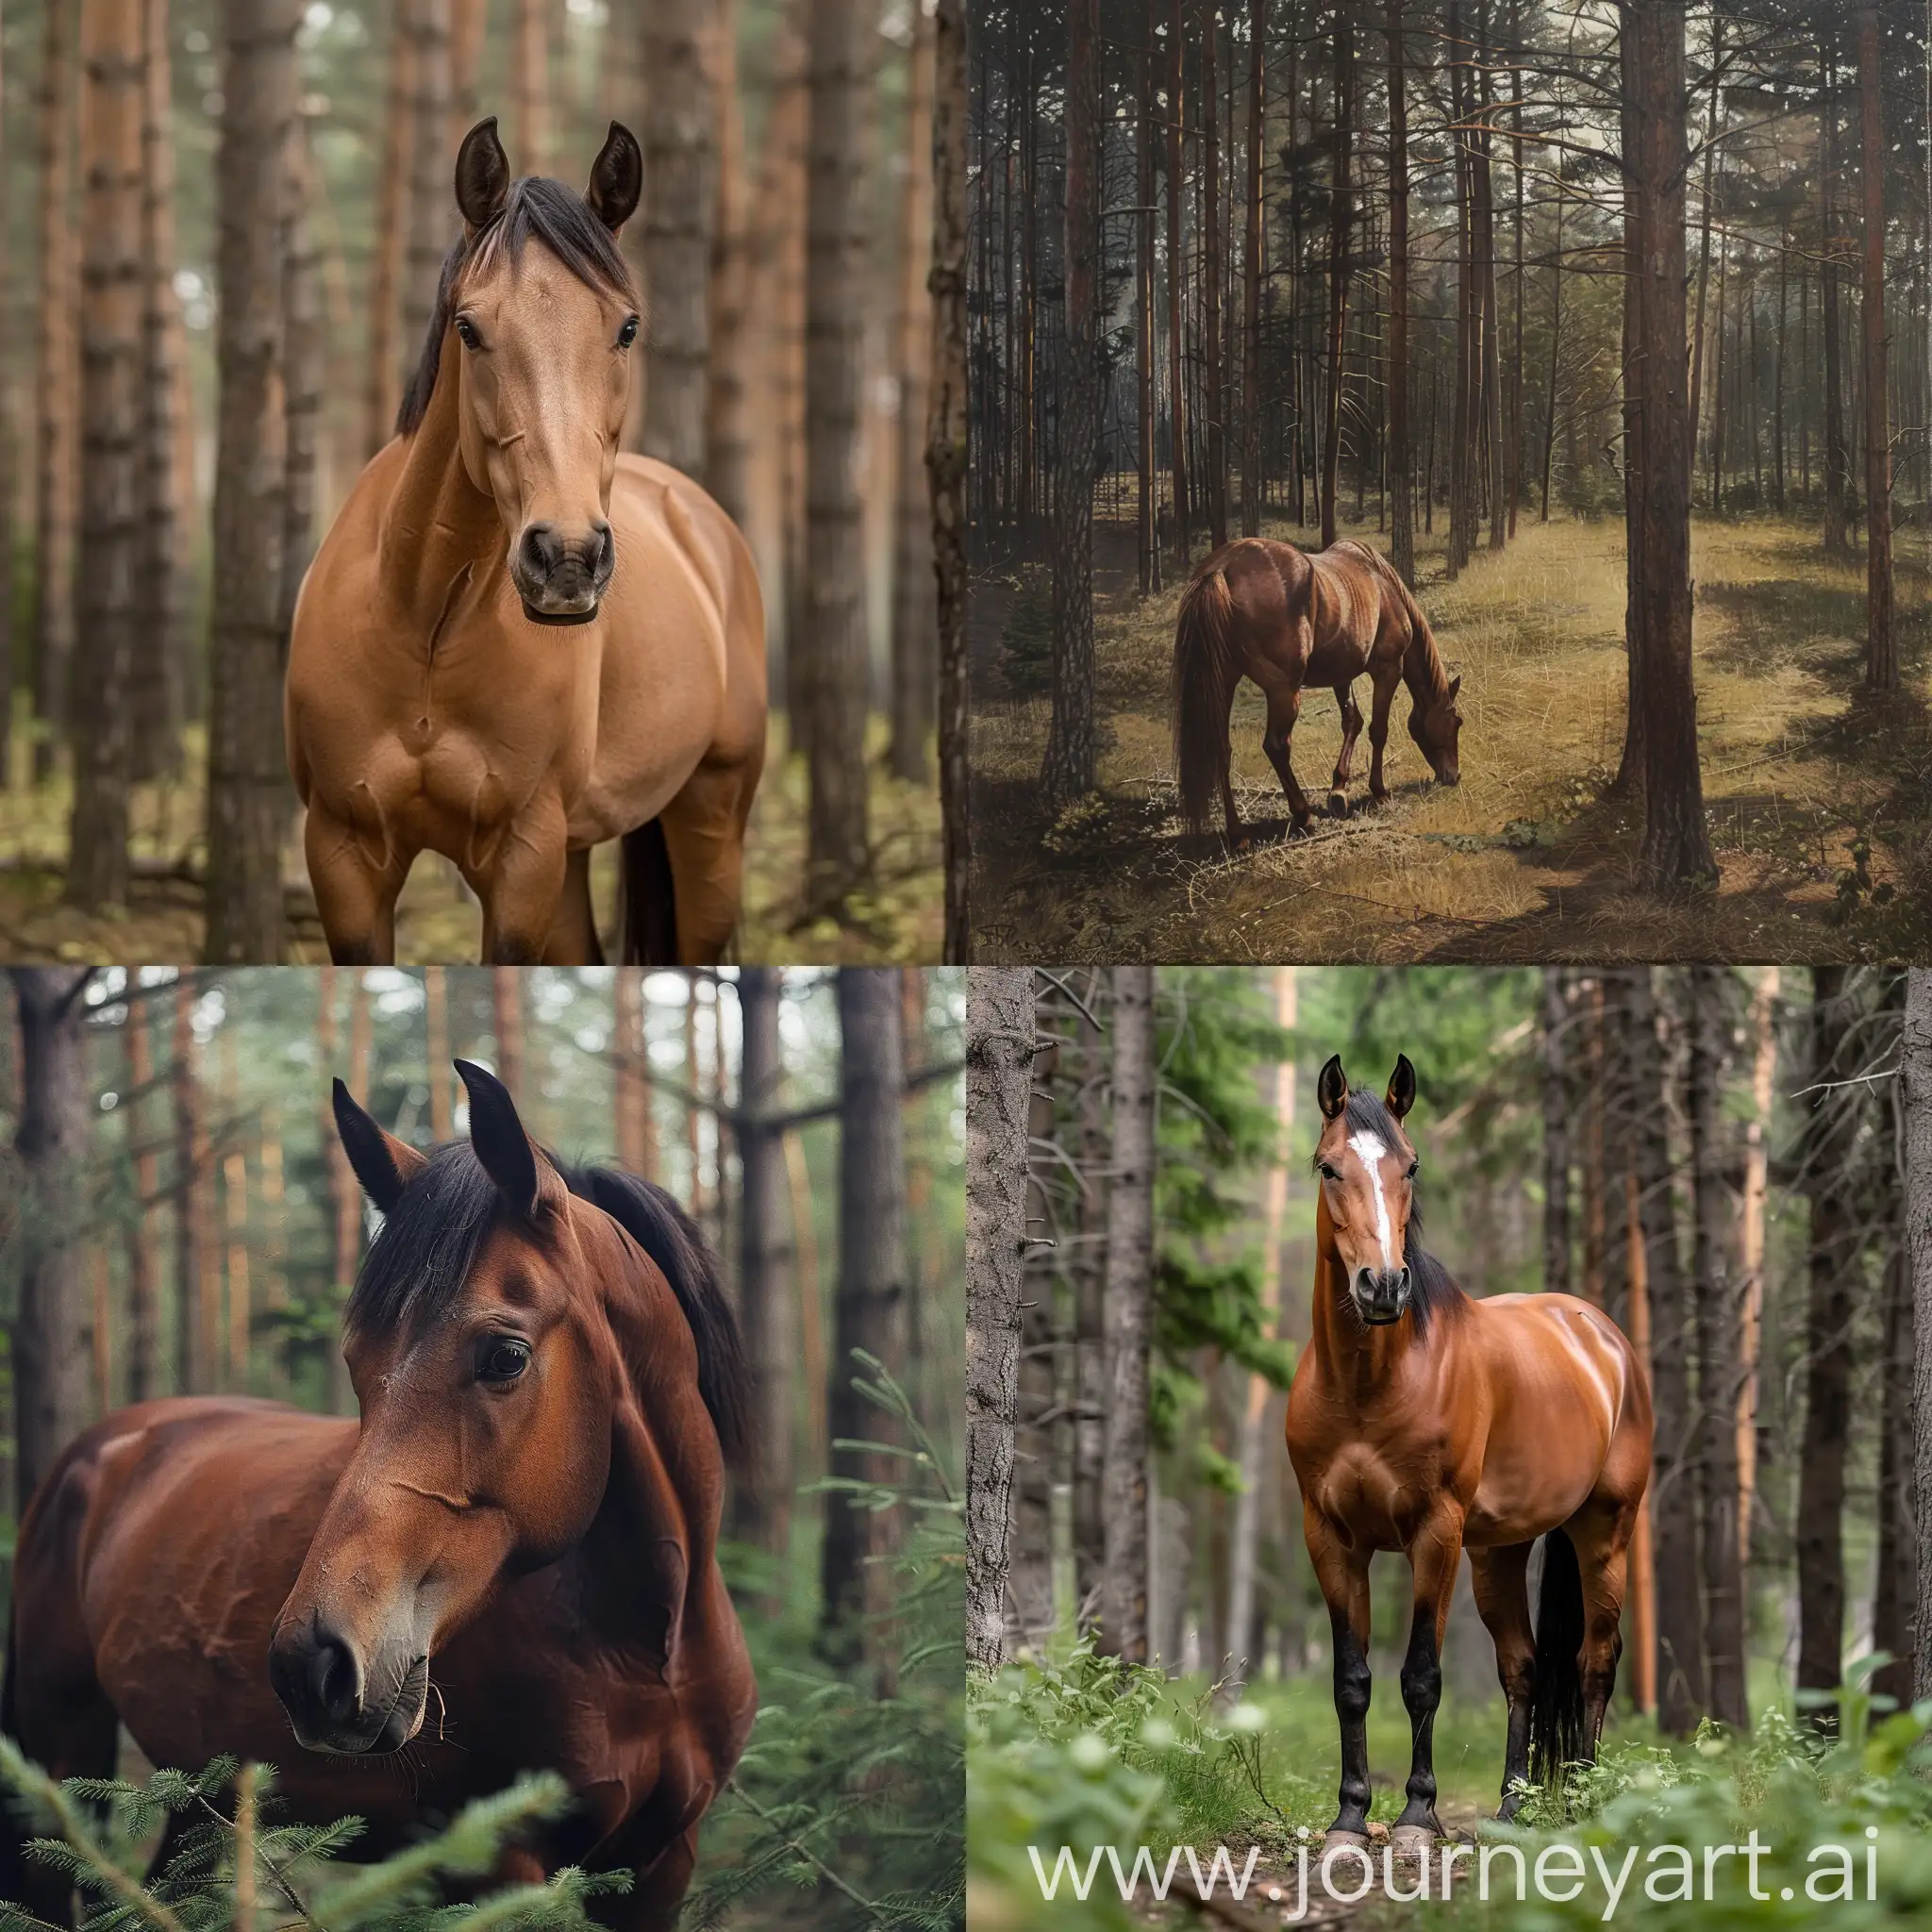 Majestic-Horse-in-Enchanting-Pine-Forest